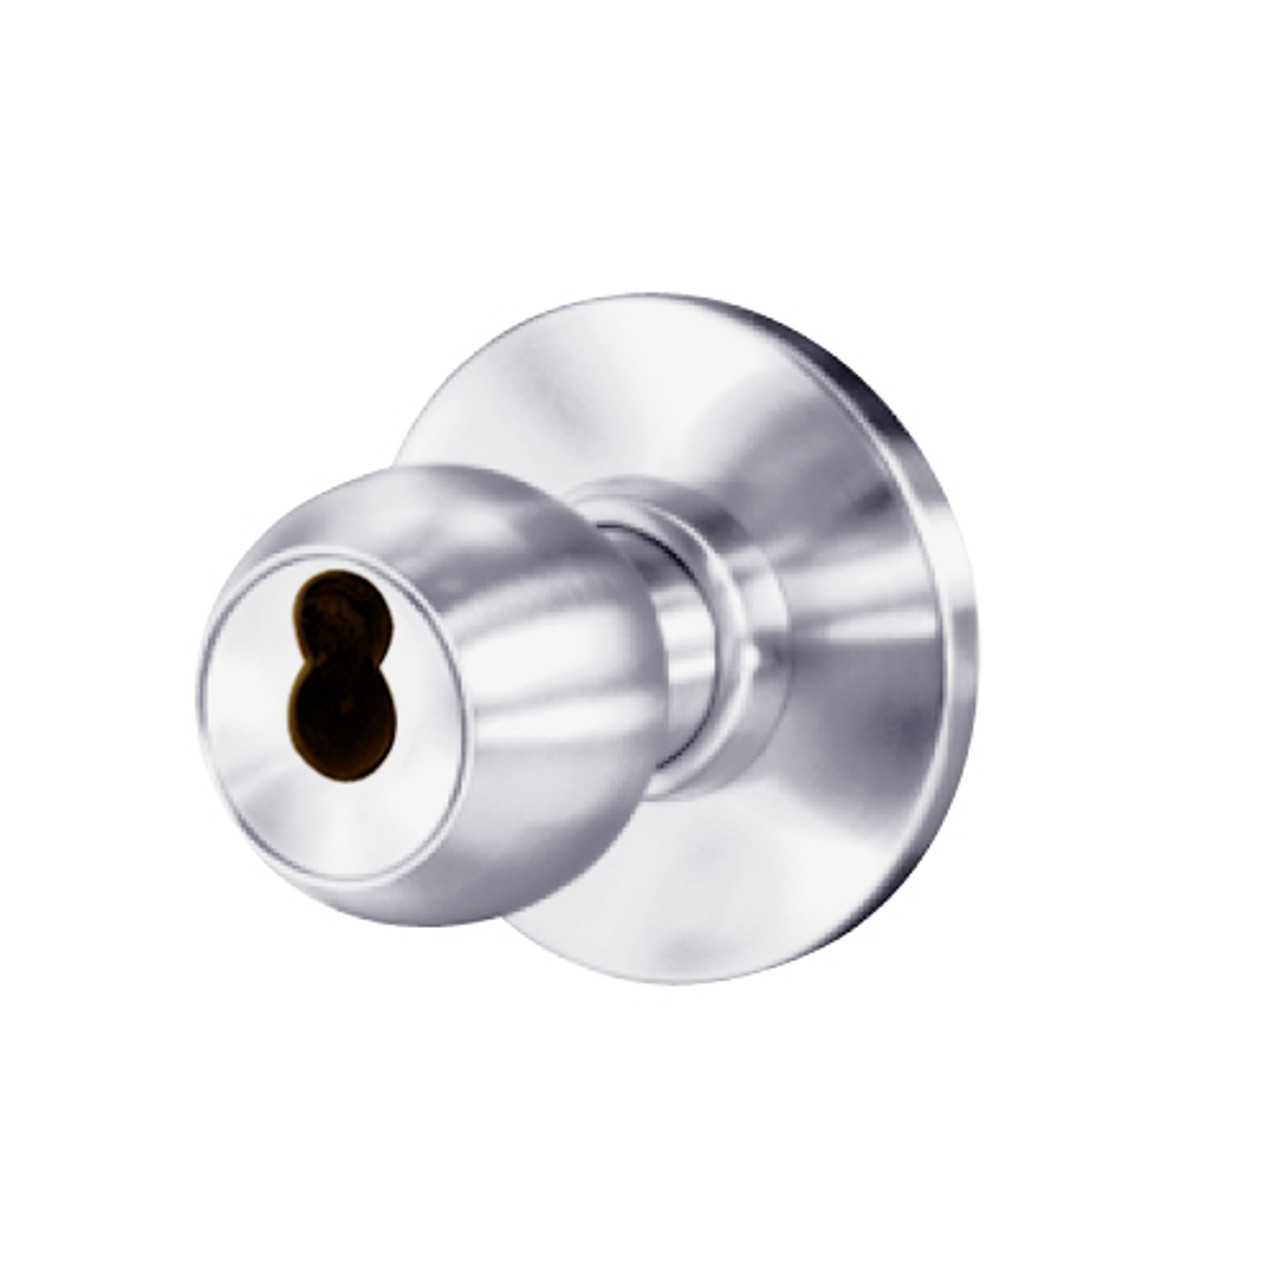 8K37YR4AS3626 Best 8K Series Exit Heavy Duty Cylindrical Knob Locks with Round Style in Satin Chrome